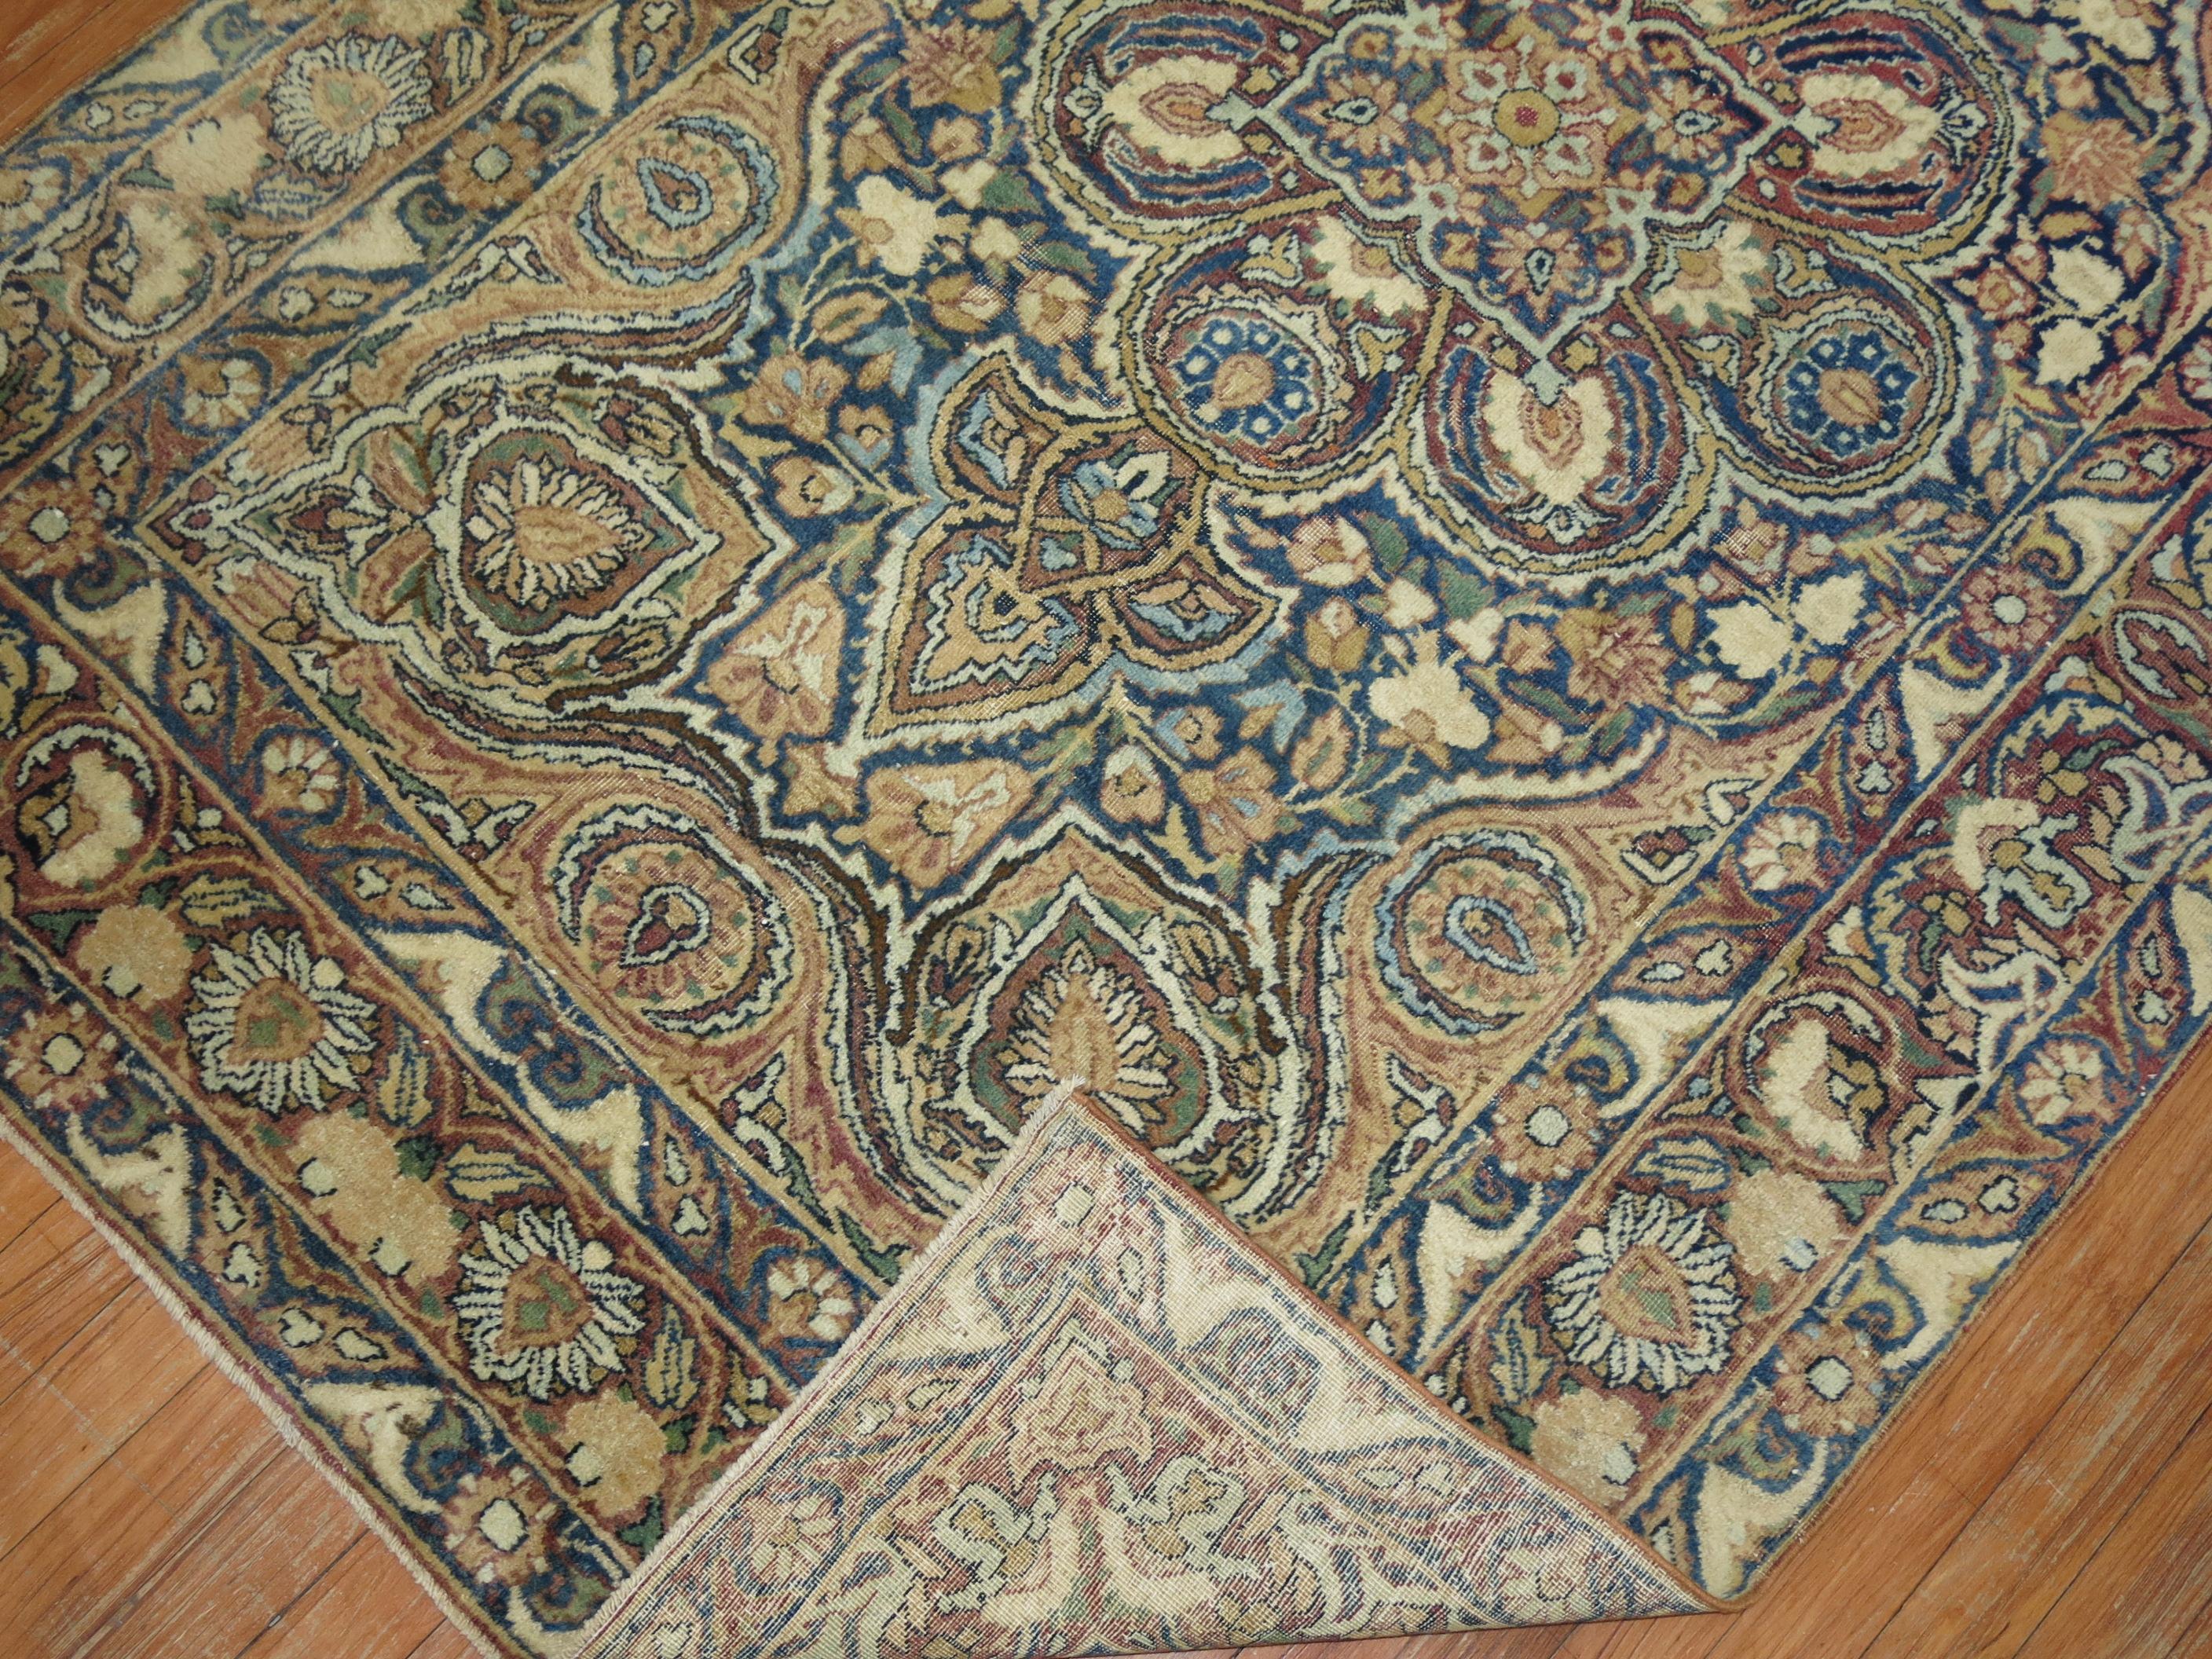 An early 20th century Persian Lavar Kerman traditional rug. Accents in wine, blue, green and brown

Measures: 4'1